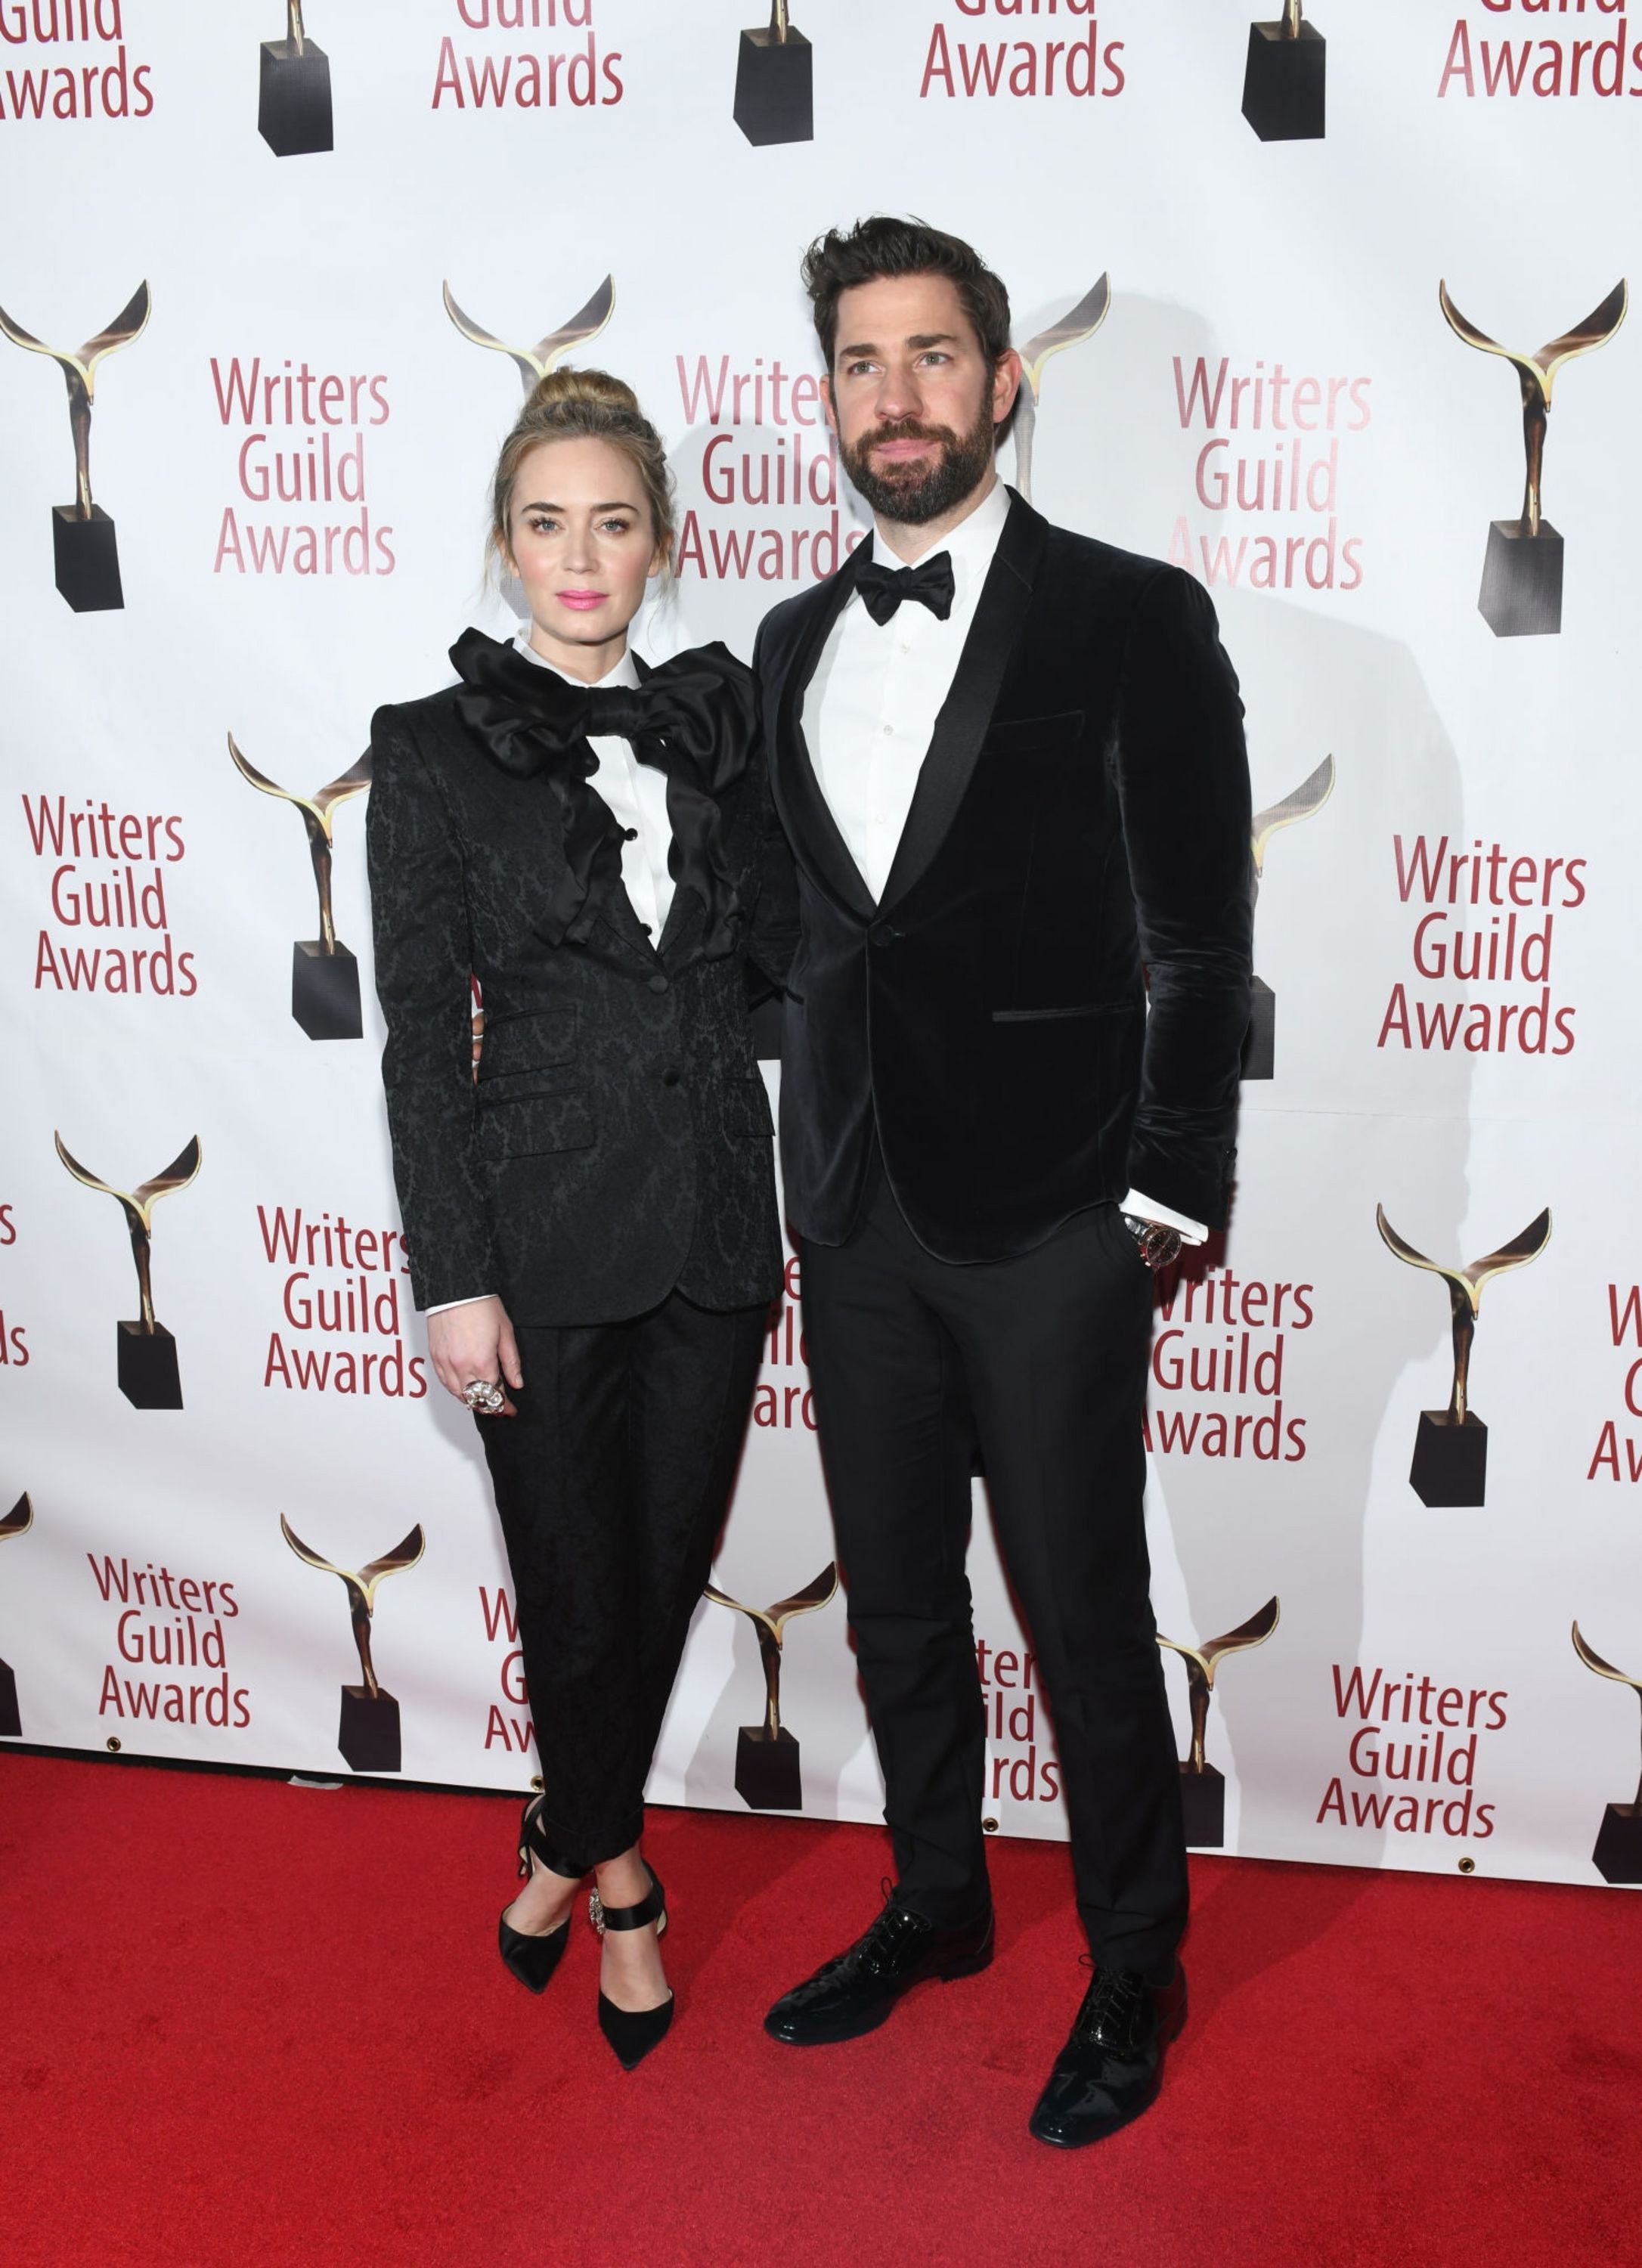 2019-02-17-71st-Annual-Writers-Guild-Awards-039.jpg